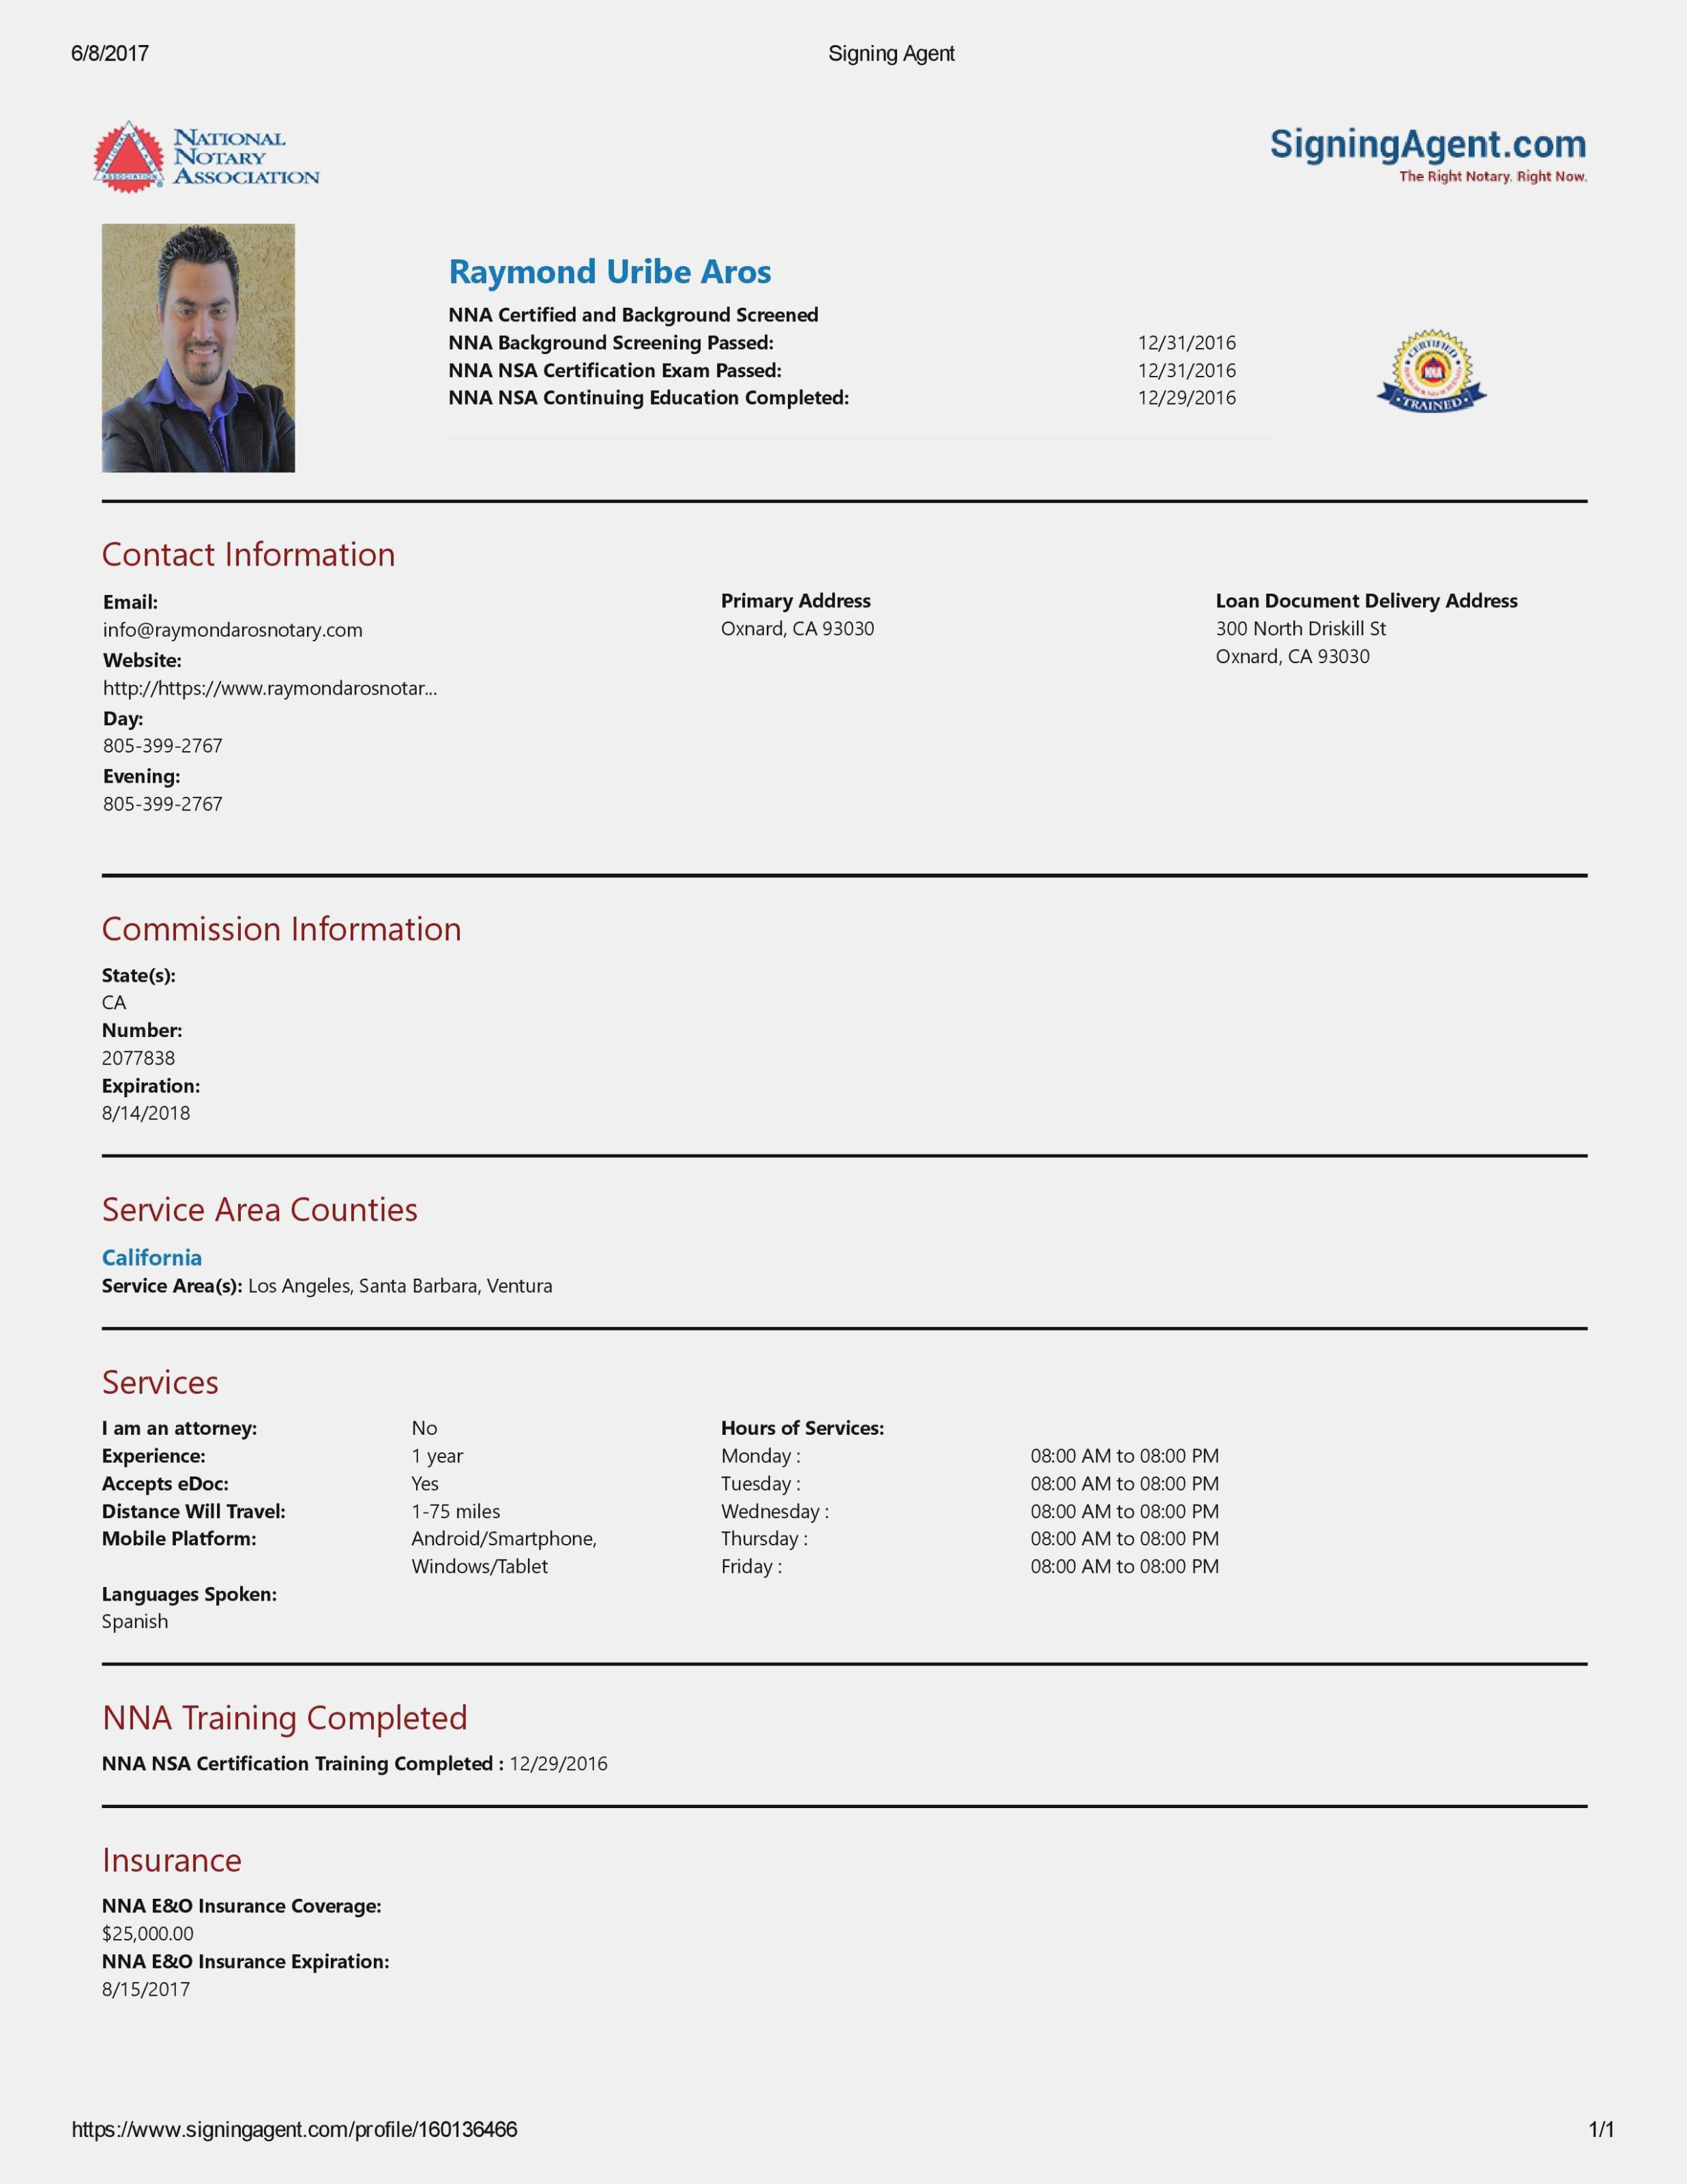 notary-invoice-template-free-for-your-needs